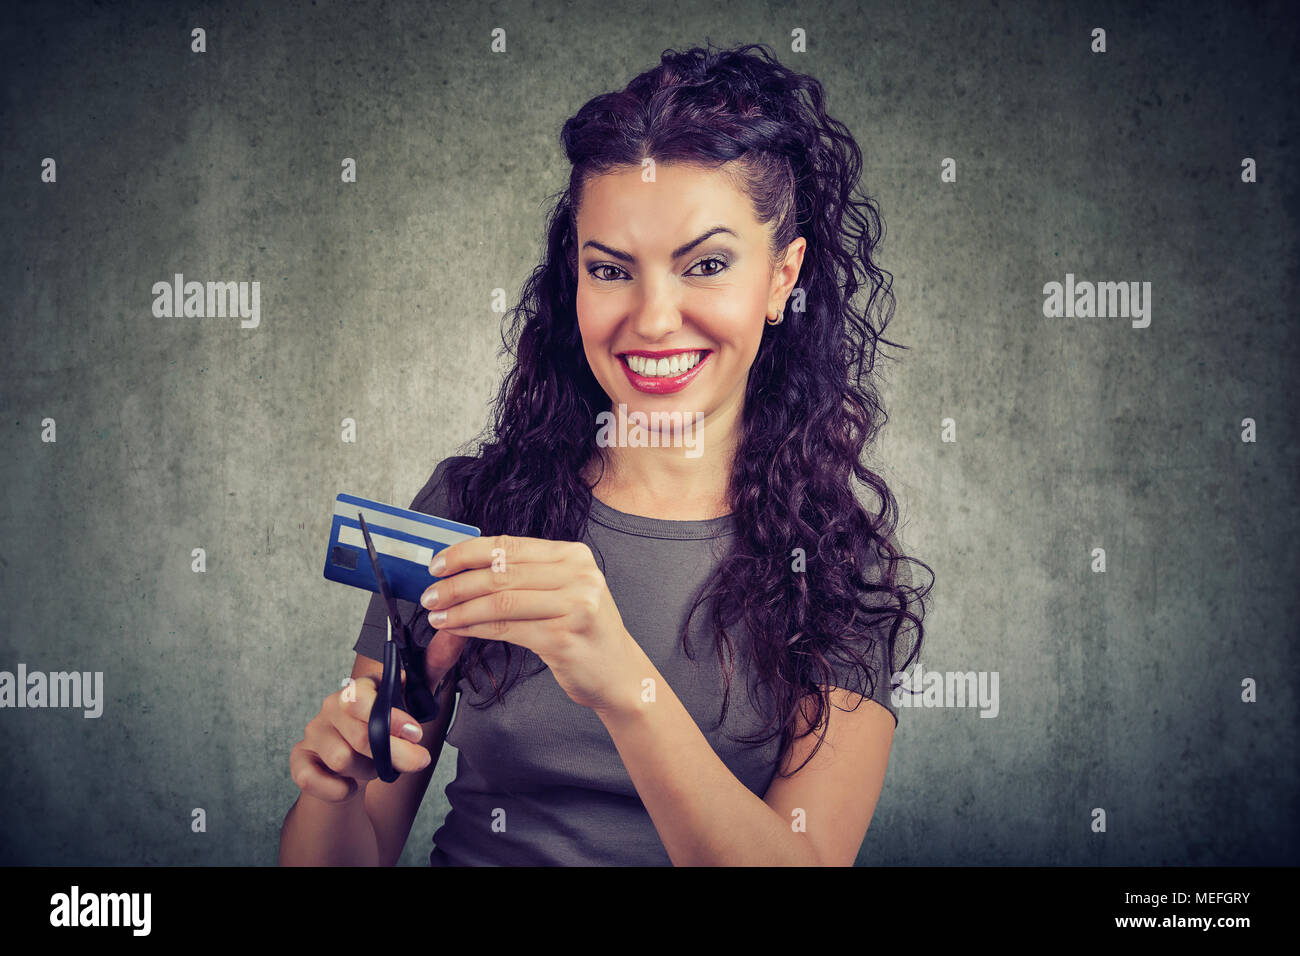 Cheerful young woman looking happily at camera done with credit cards. Stock Photo